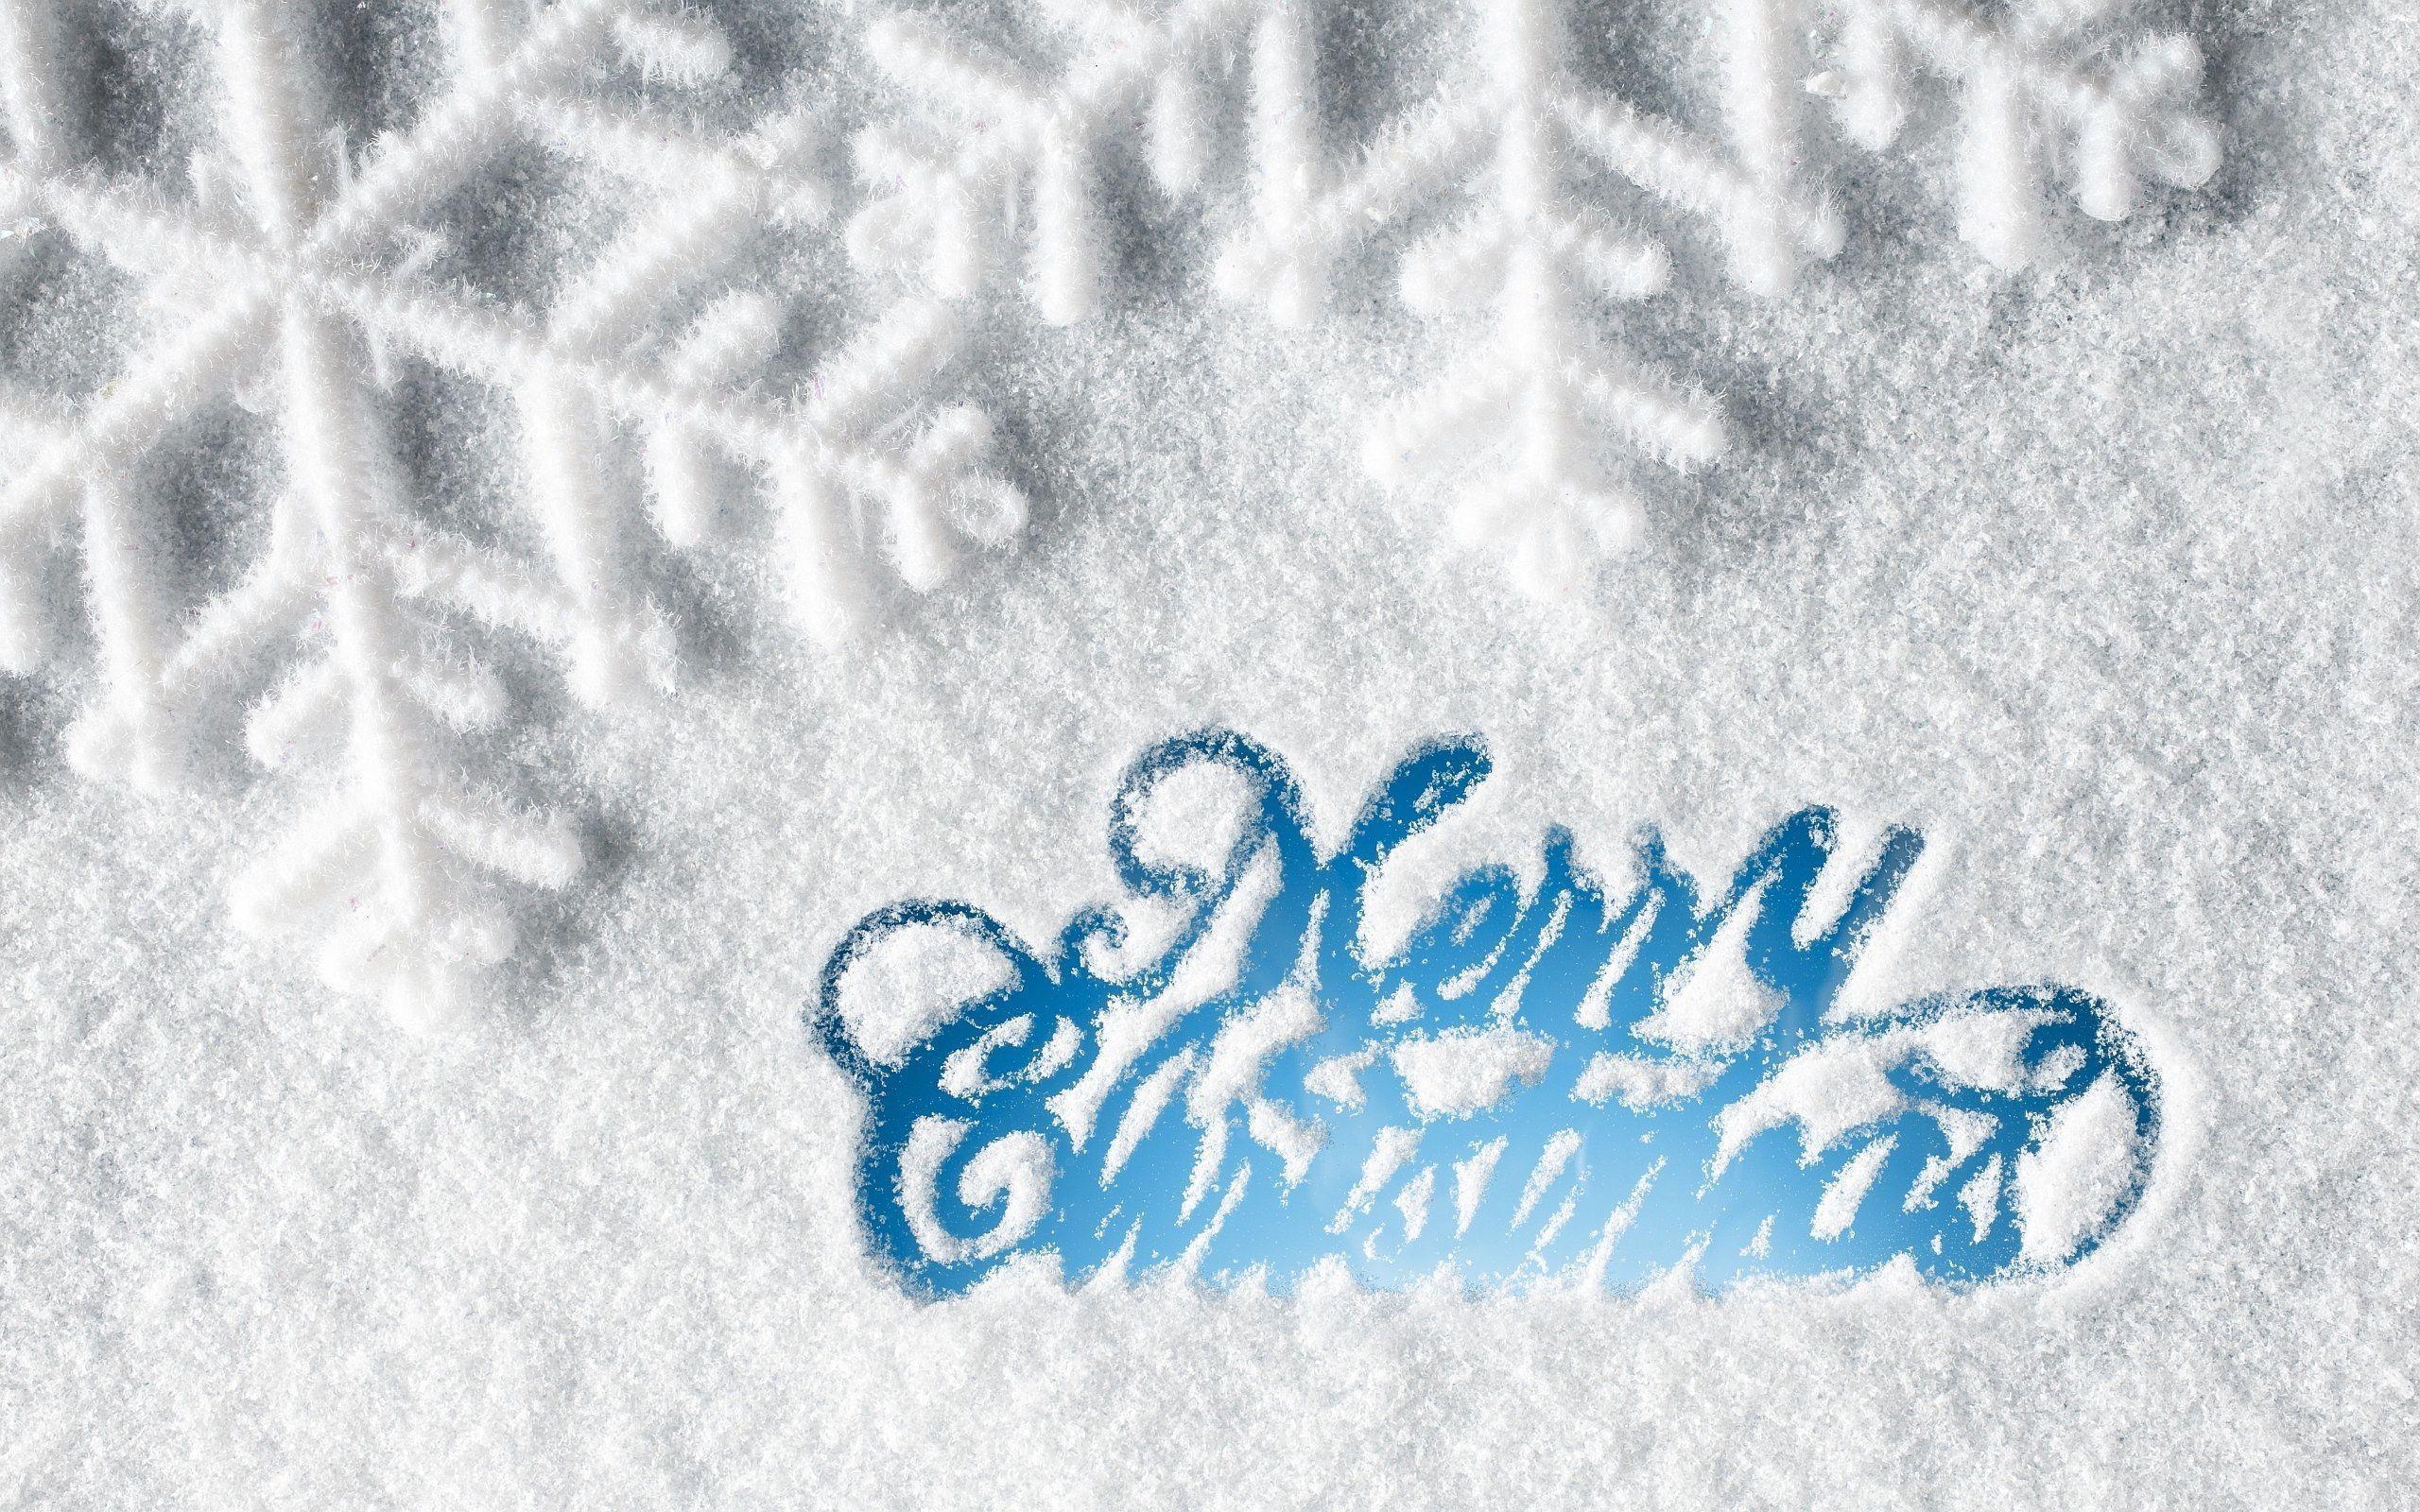 Desktop Background Image for Merry Christmas Wishes 2015